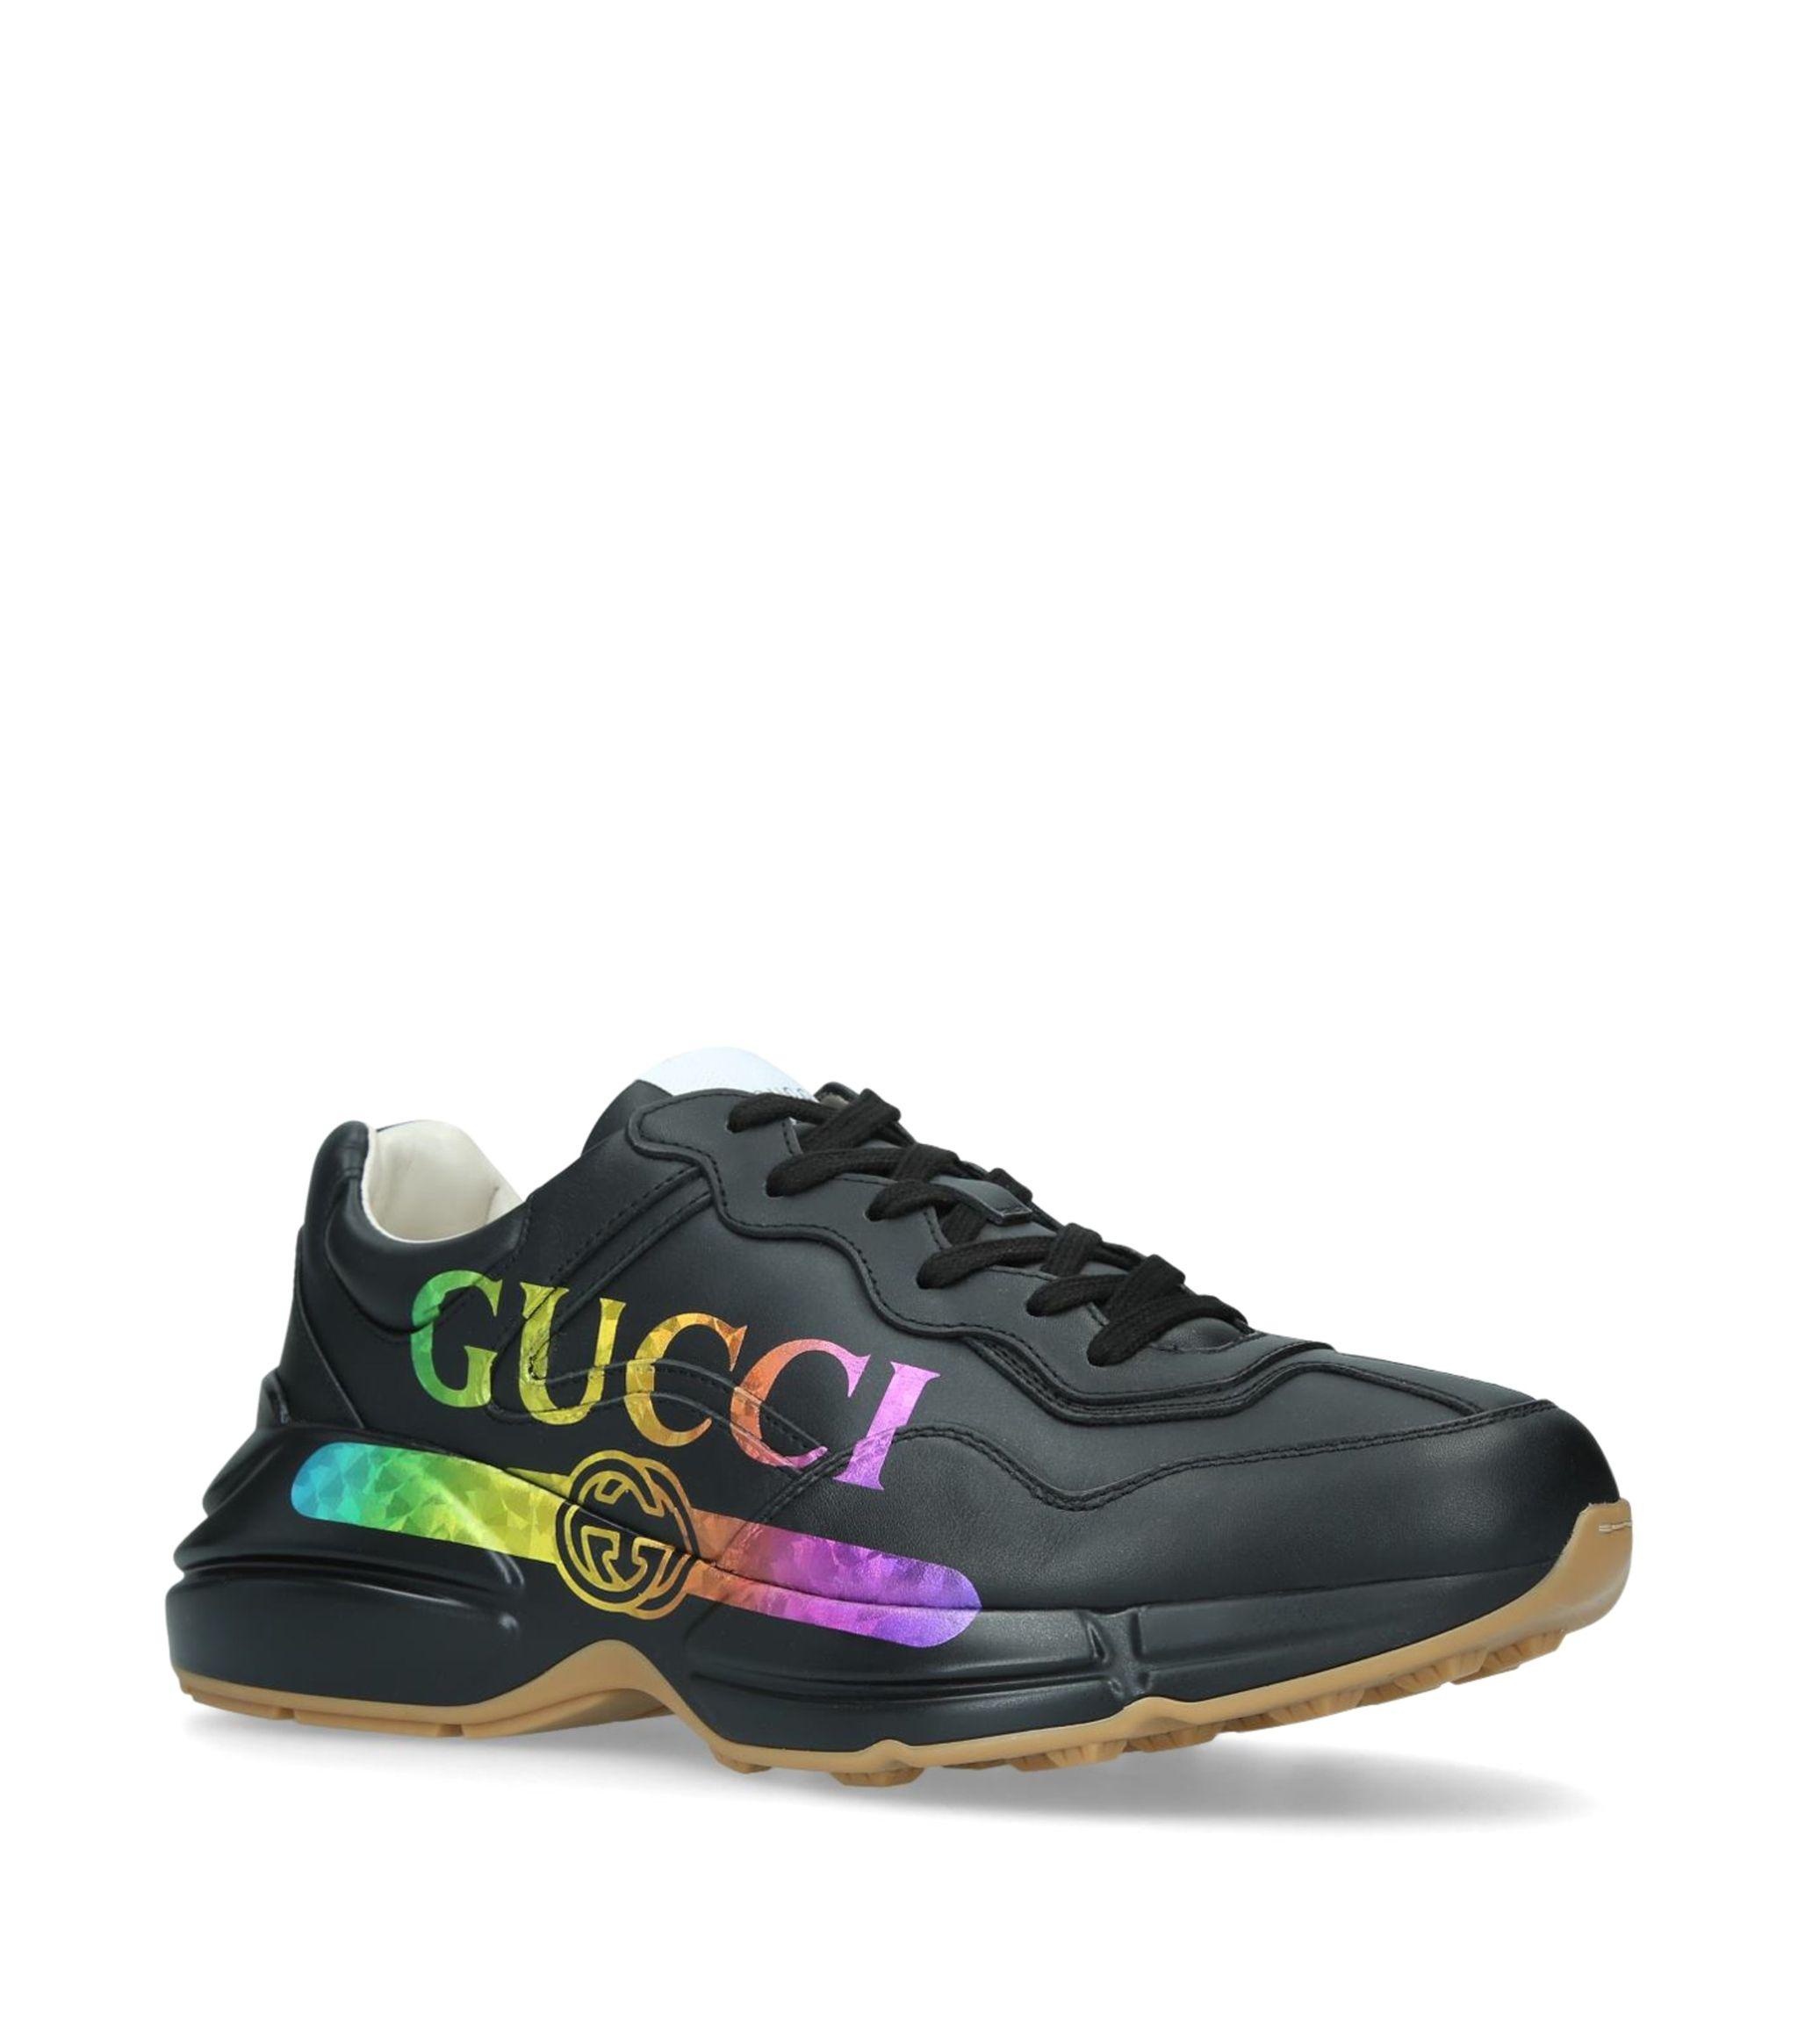 Gucci Rhyton Sneakers Multicolor France, SAVE 53% 